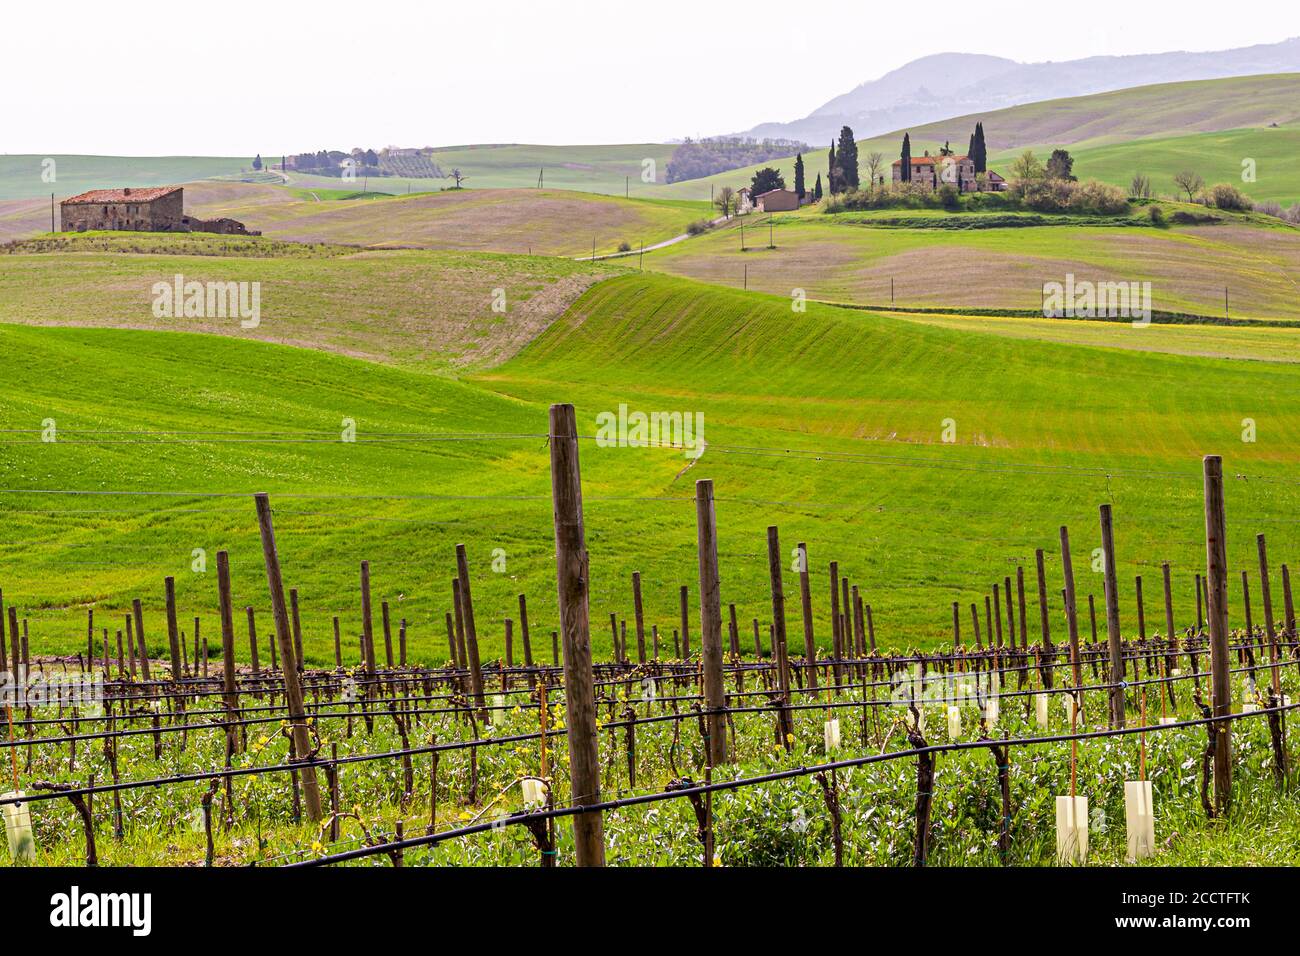 Hills, cypresses, fields, vineyards ... Tuscan landscape in spring, green fields, cypreses and olive trees, hiking in Tuscany, Bagno Vignoni, Val d'Orcia, Italy. UNESCO World Heritage Stock Photo